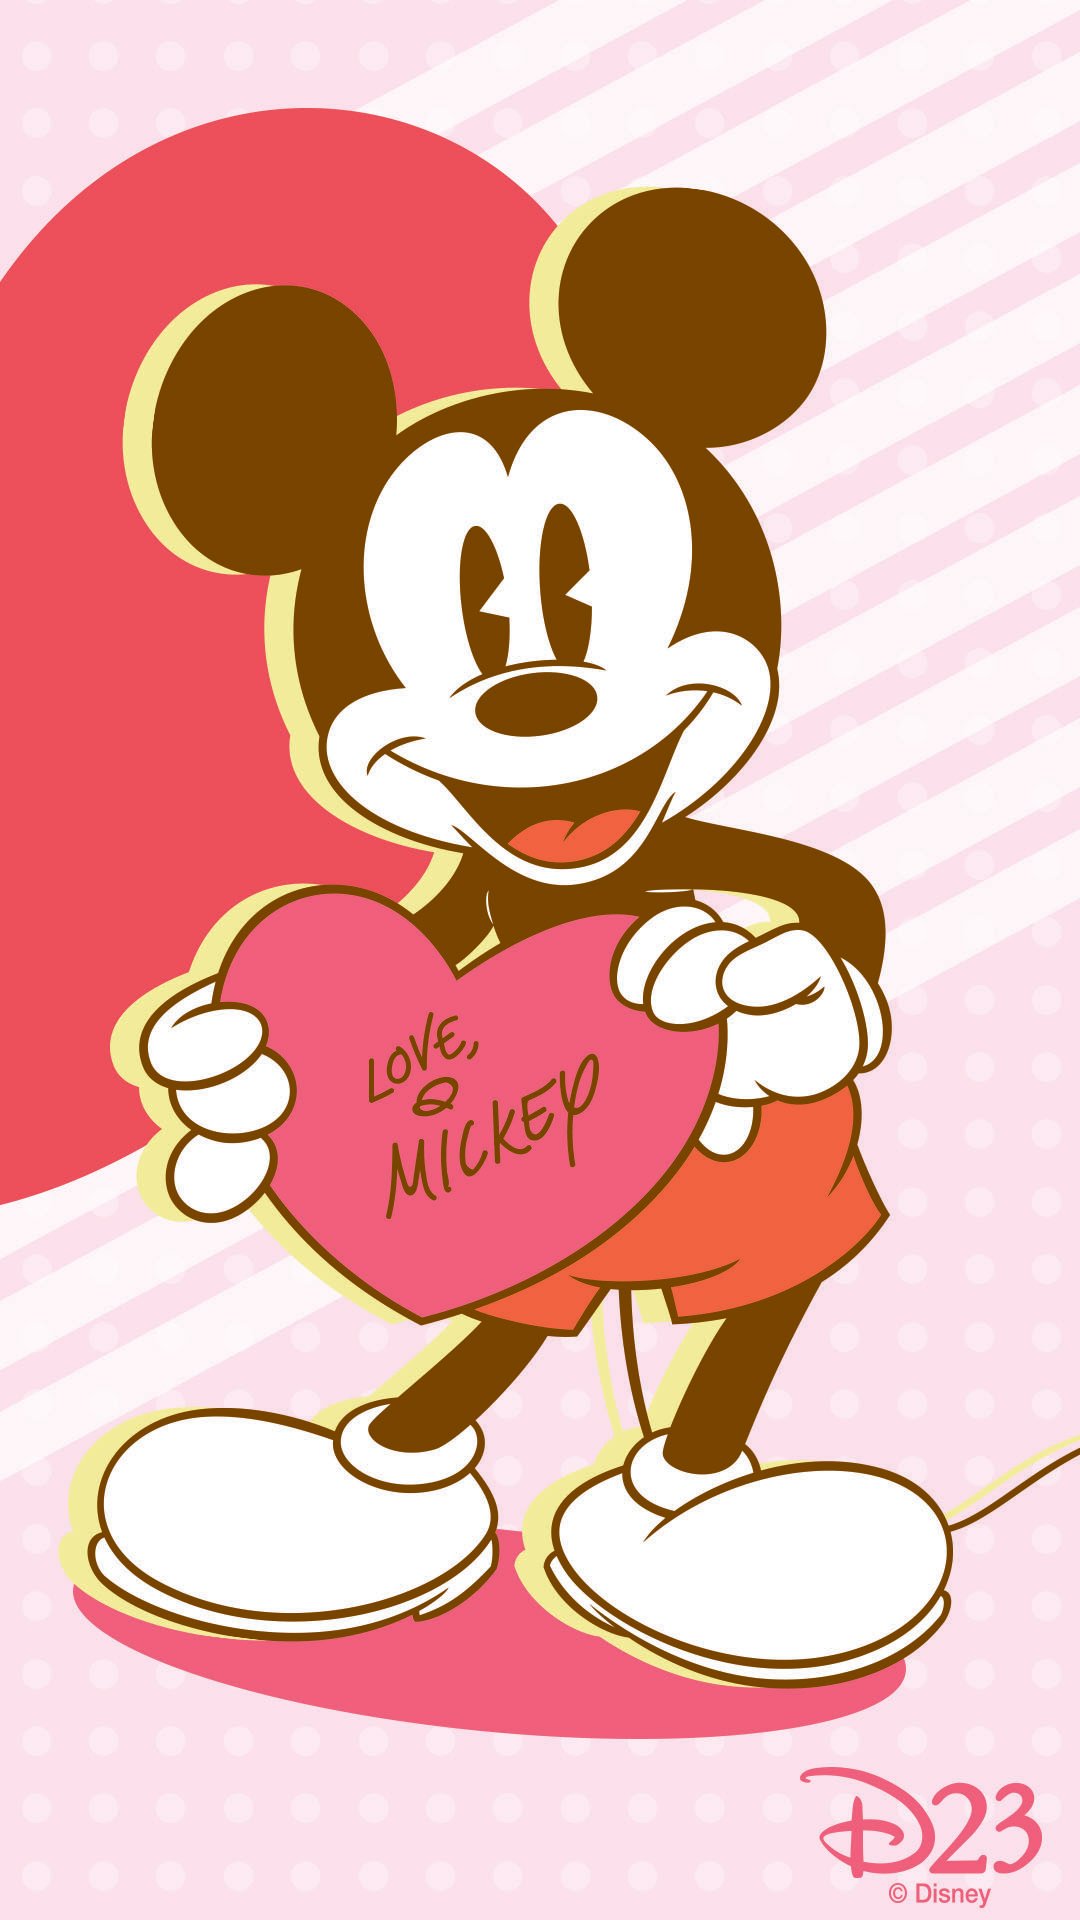 Match with Your Valentine Using These Phone Wallpaper Inspired by Iconic Disney Couples